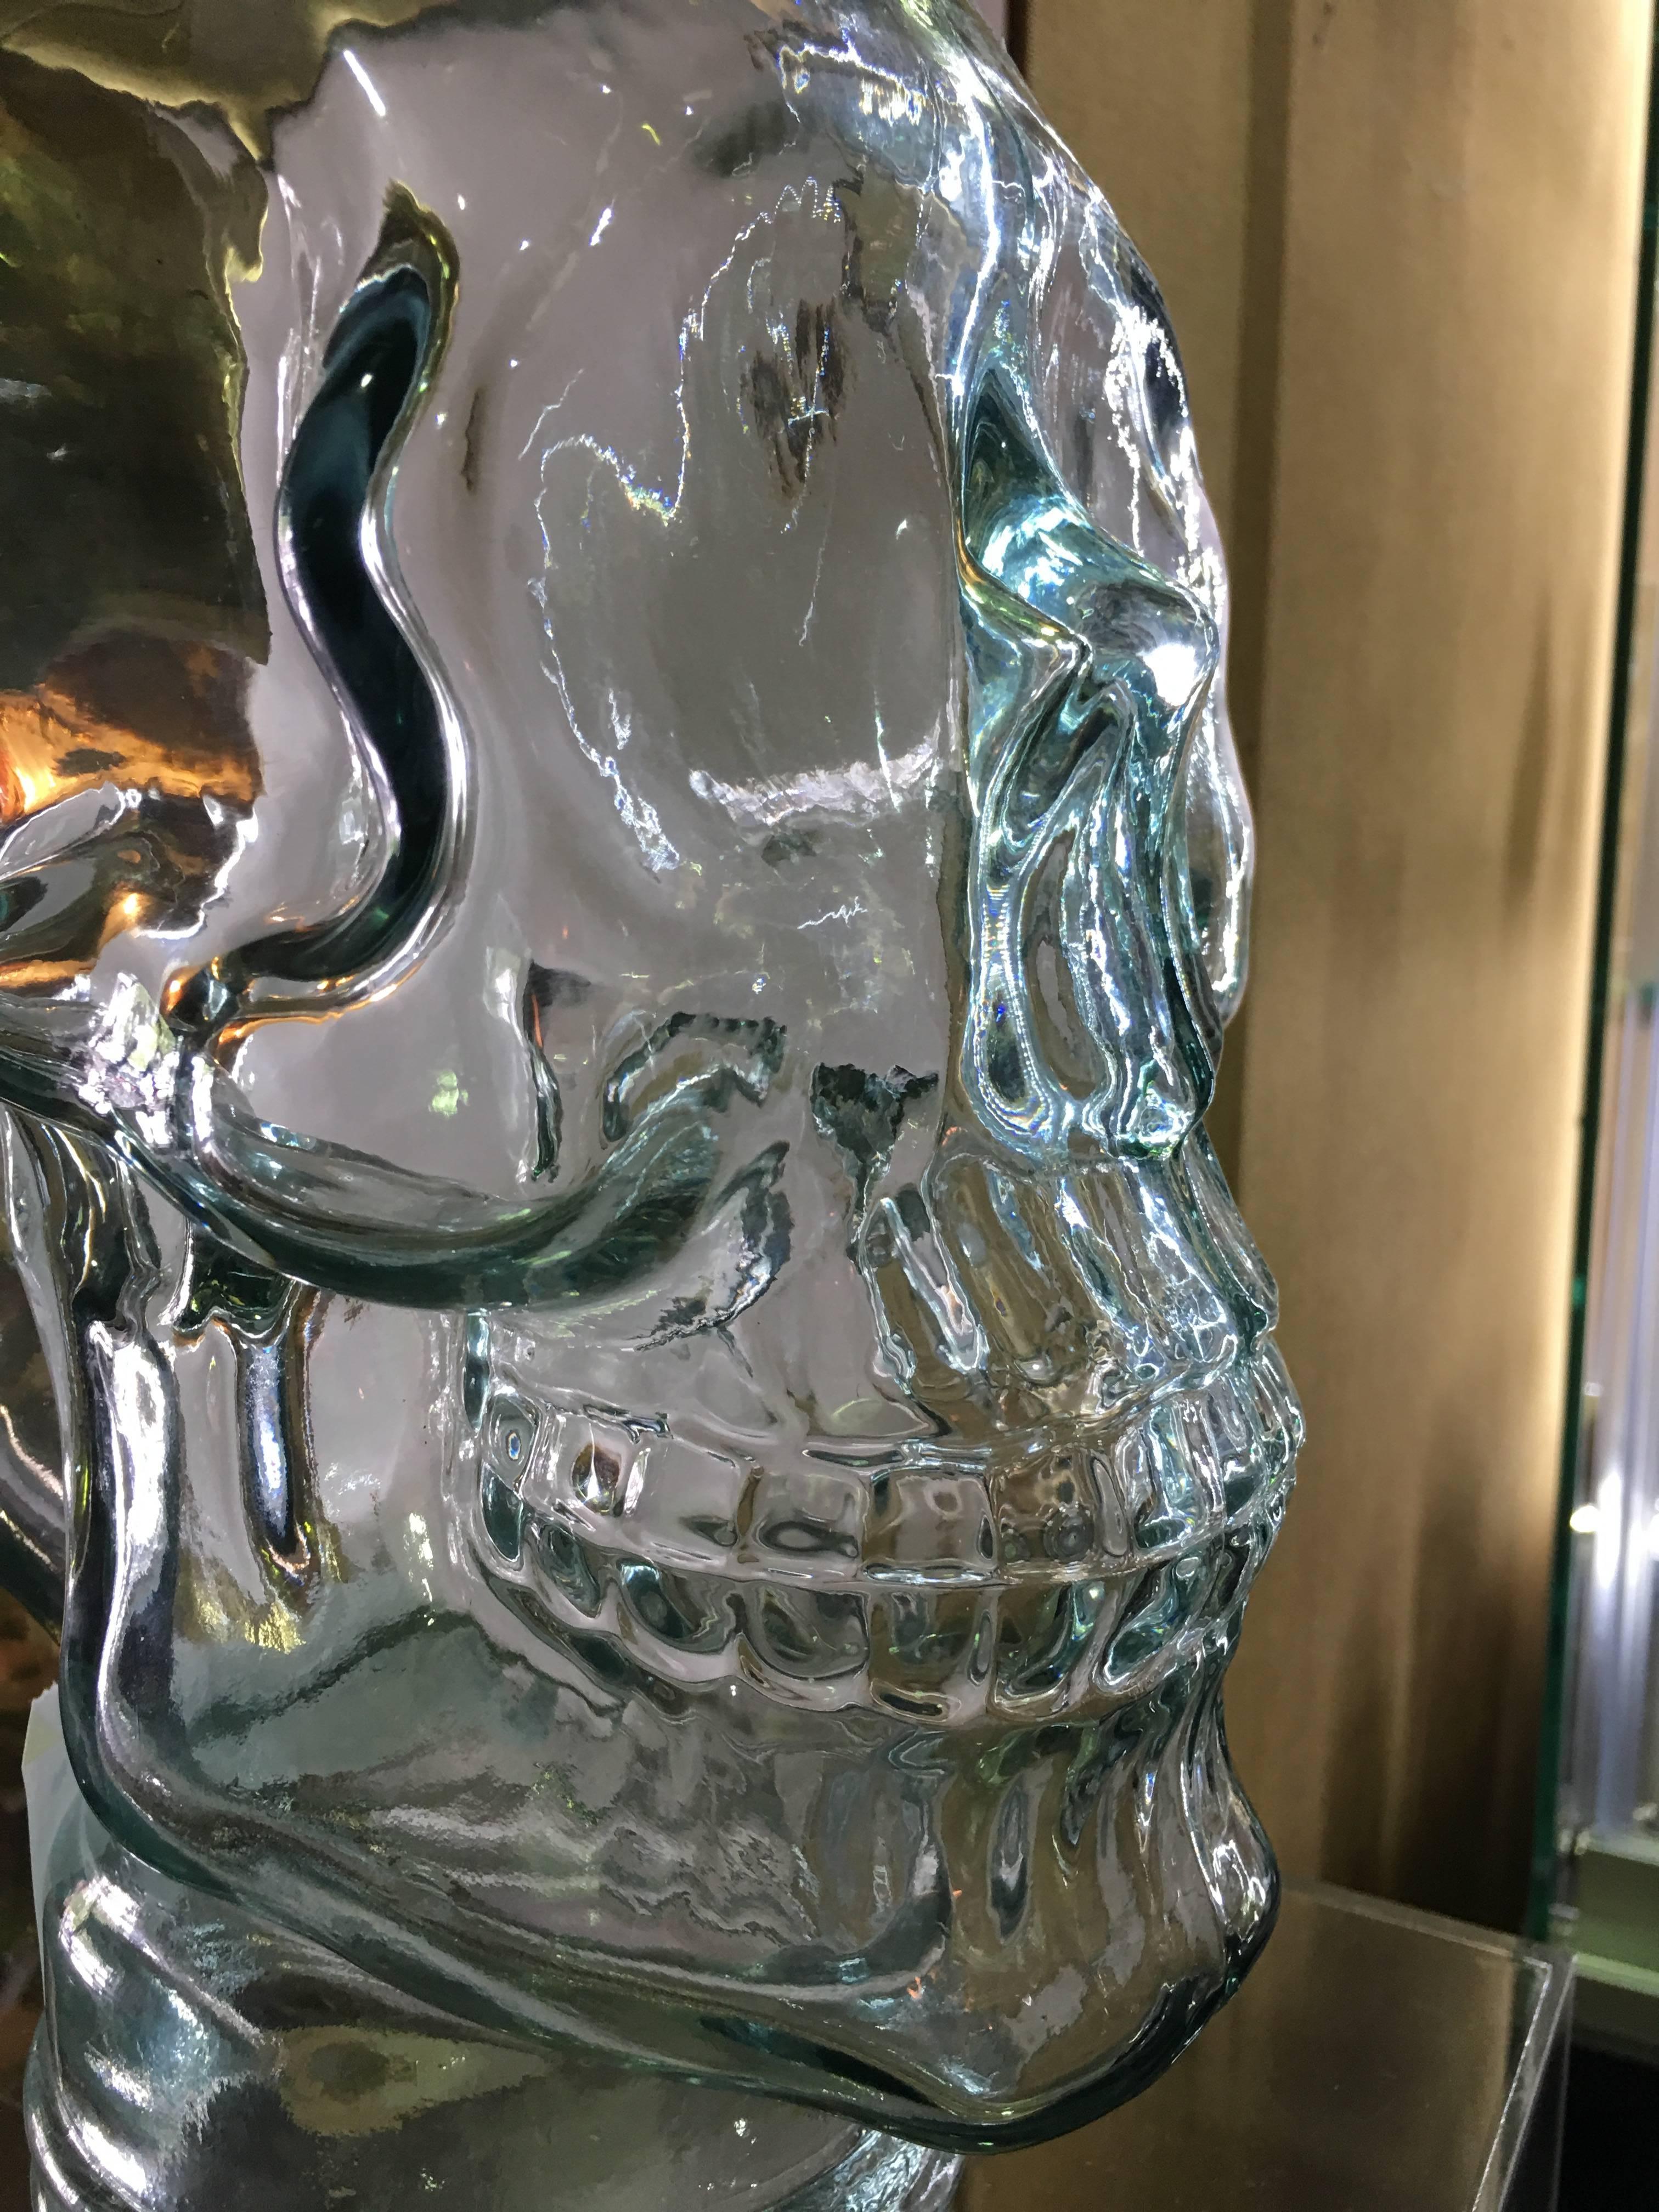 Unknown Large Glass Skull Mid-Century Table Sculpture